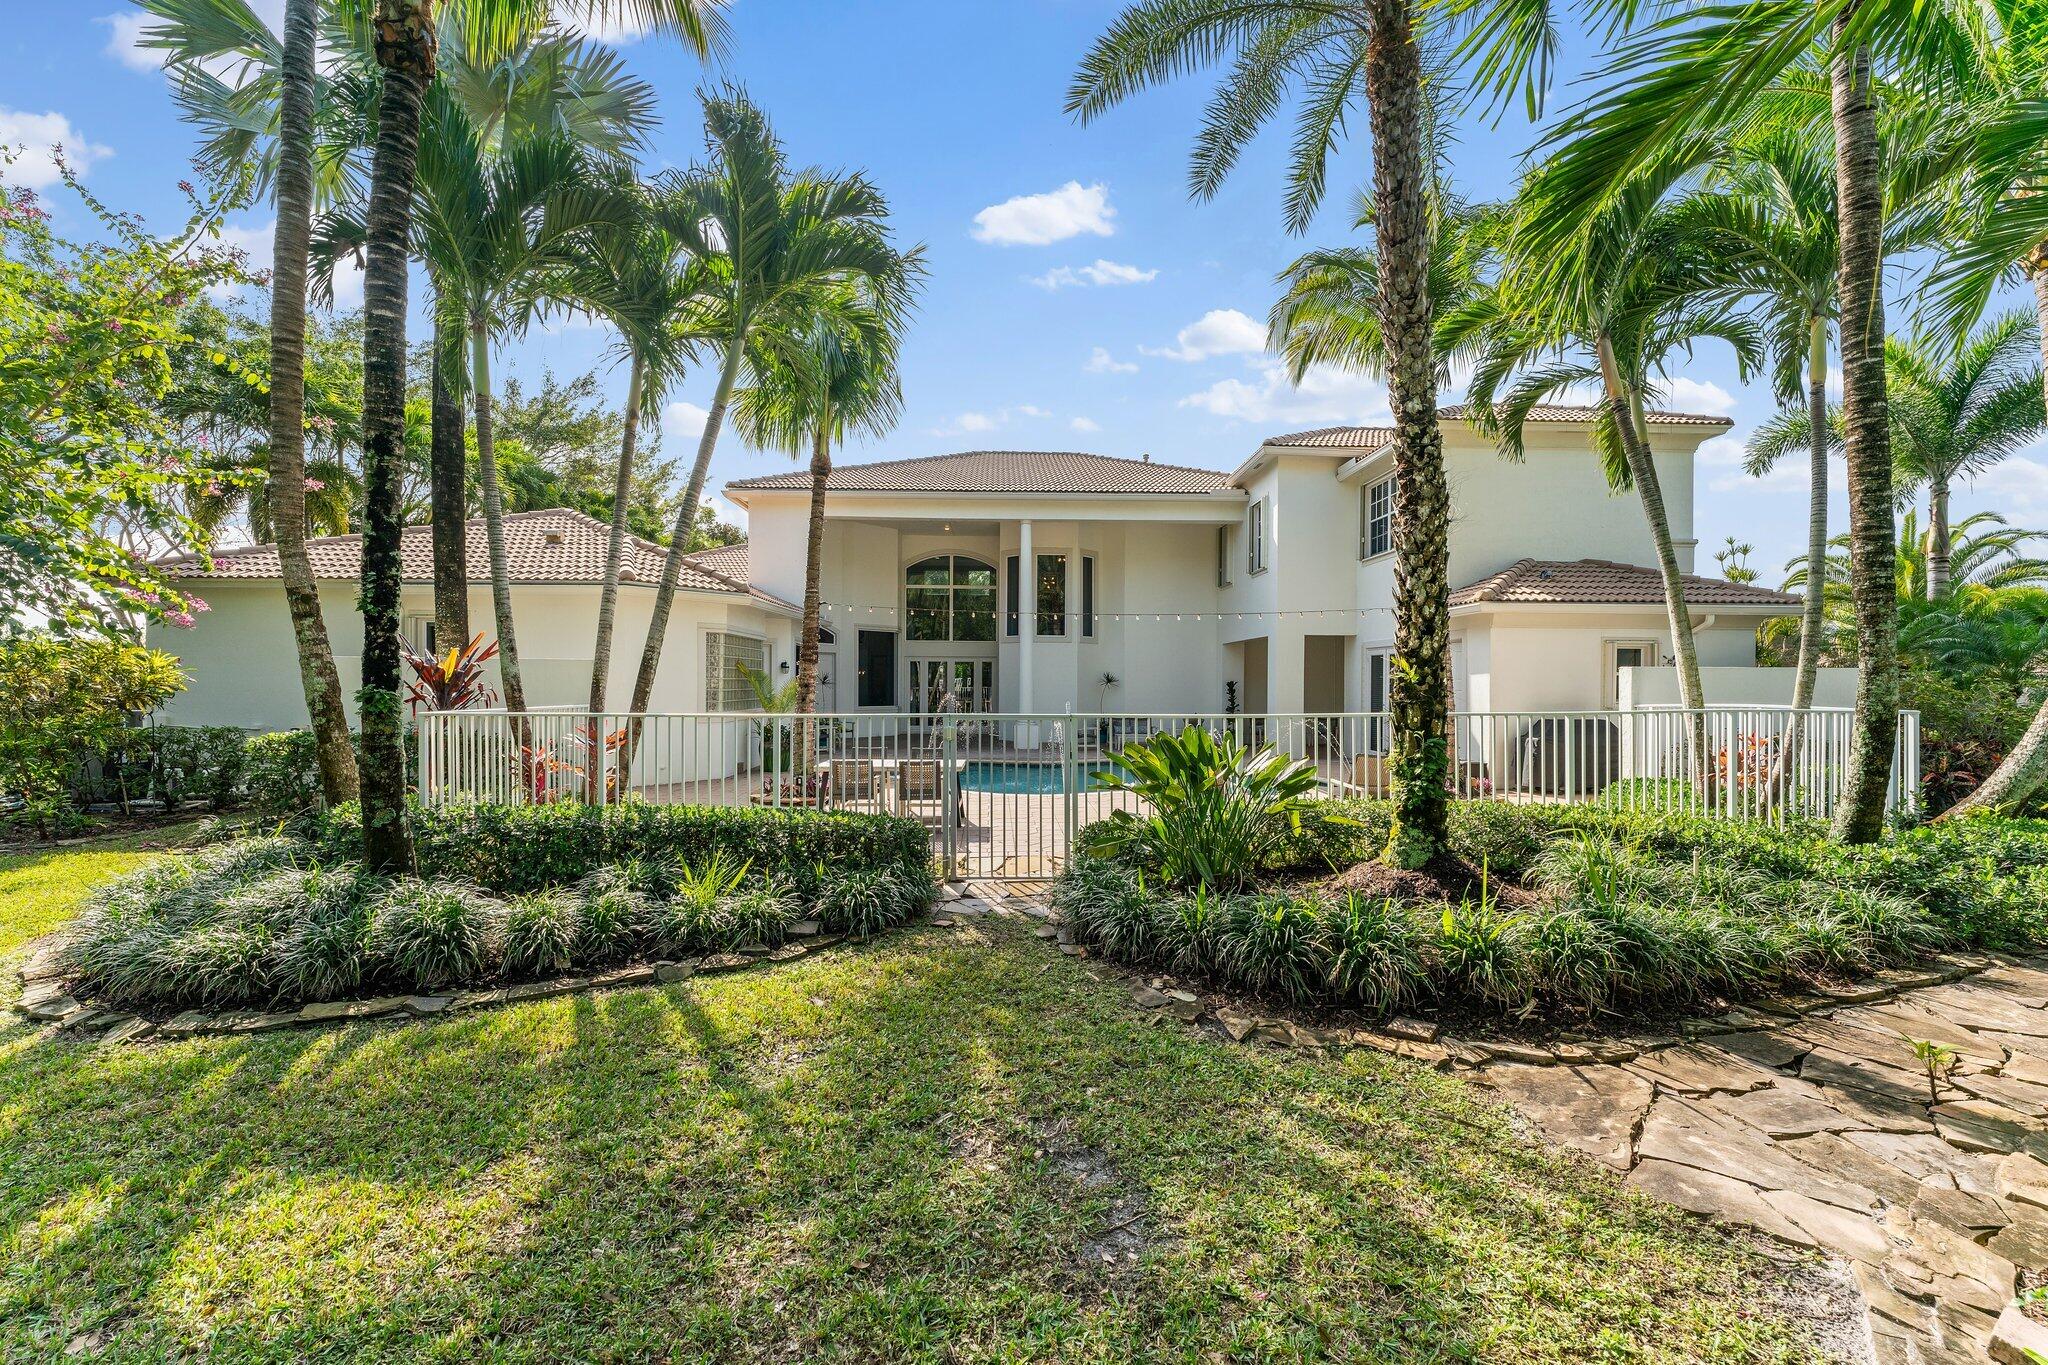 Property for Sale at 12389 Equine Lane Lane, Wellington, Palm Beach County, Florida - Bedrooms: 6 
Bathrooms: 4.5  - $1,655,000